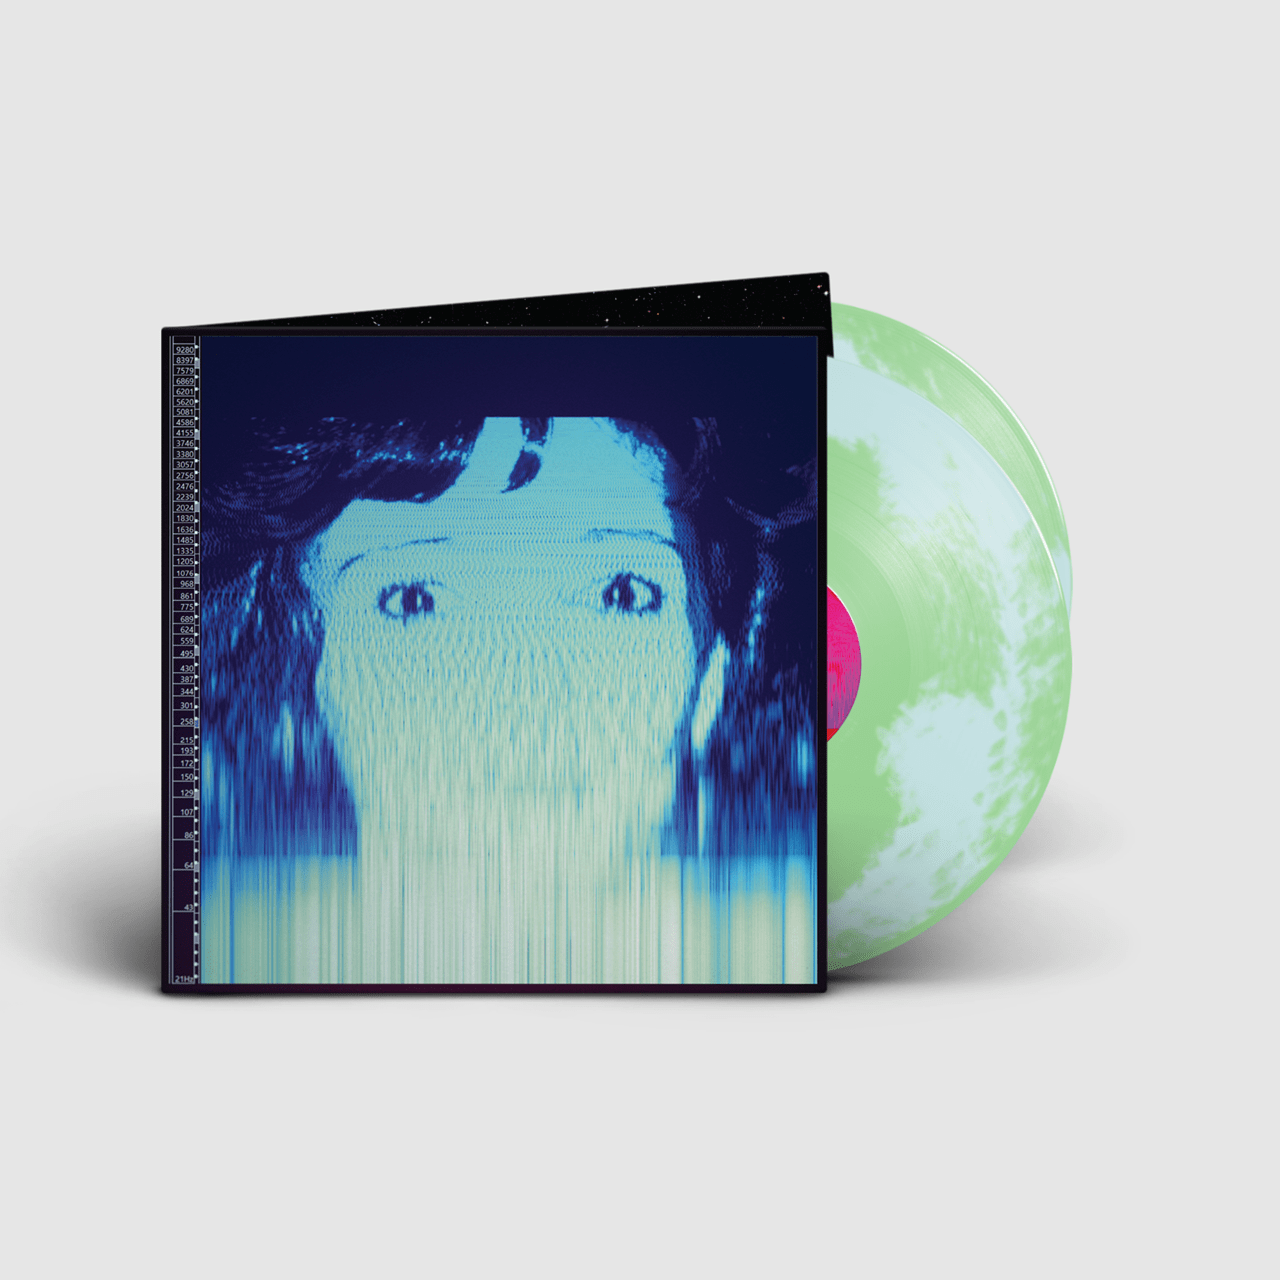 We Will Always Love You Limited Edition Doublemint Electric Blue Vinyl Vinyl 12 Album Free Shipping Over Hmv Store